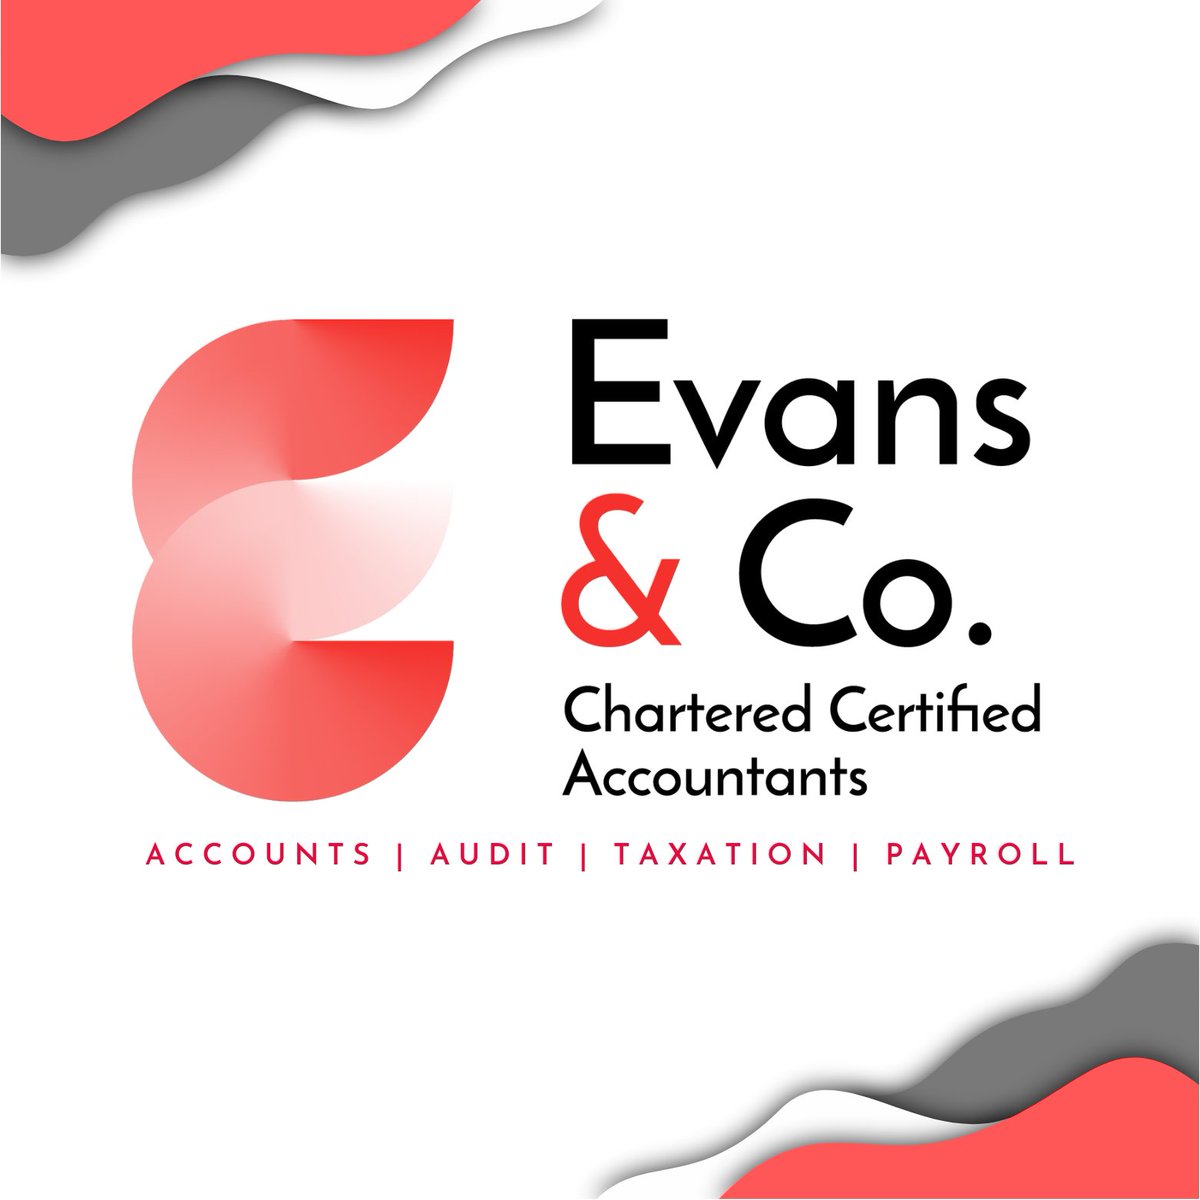 A new name and a new logo but the same friendly, knowledgeable and approachable Chartered Certified Accountants!